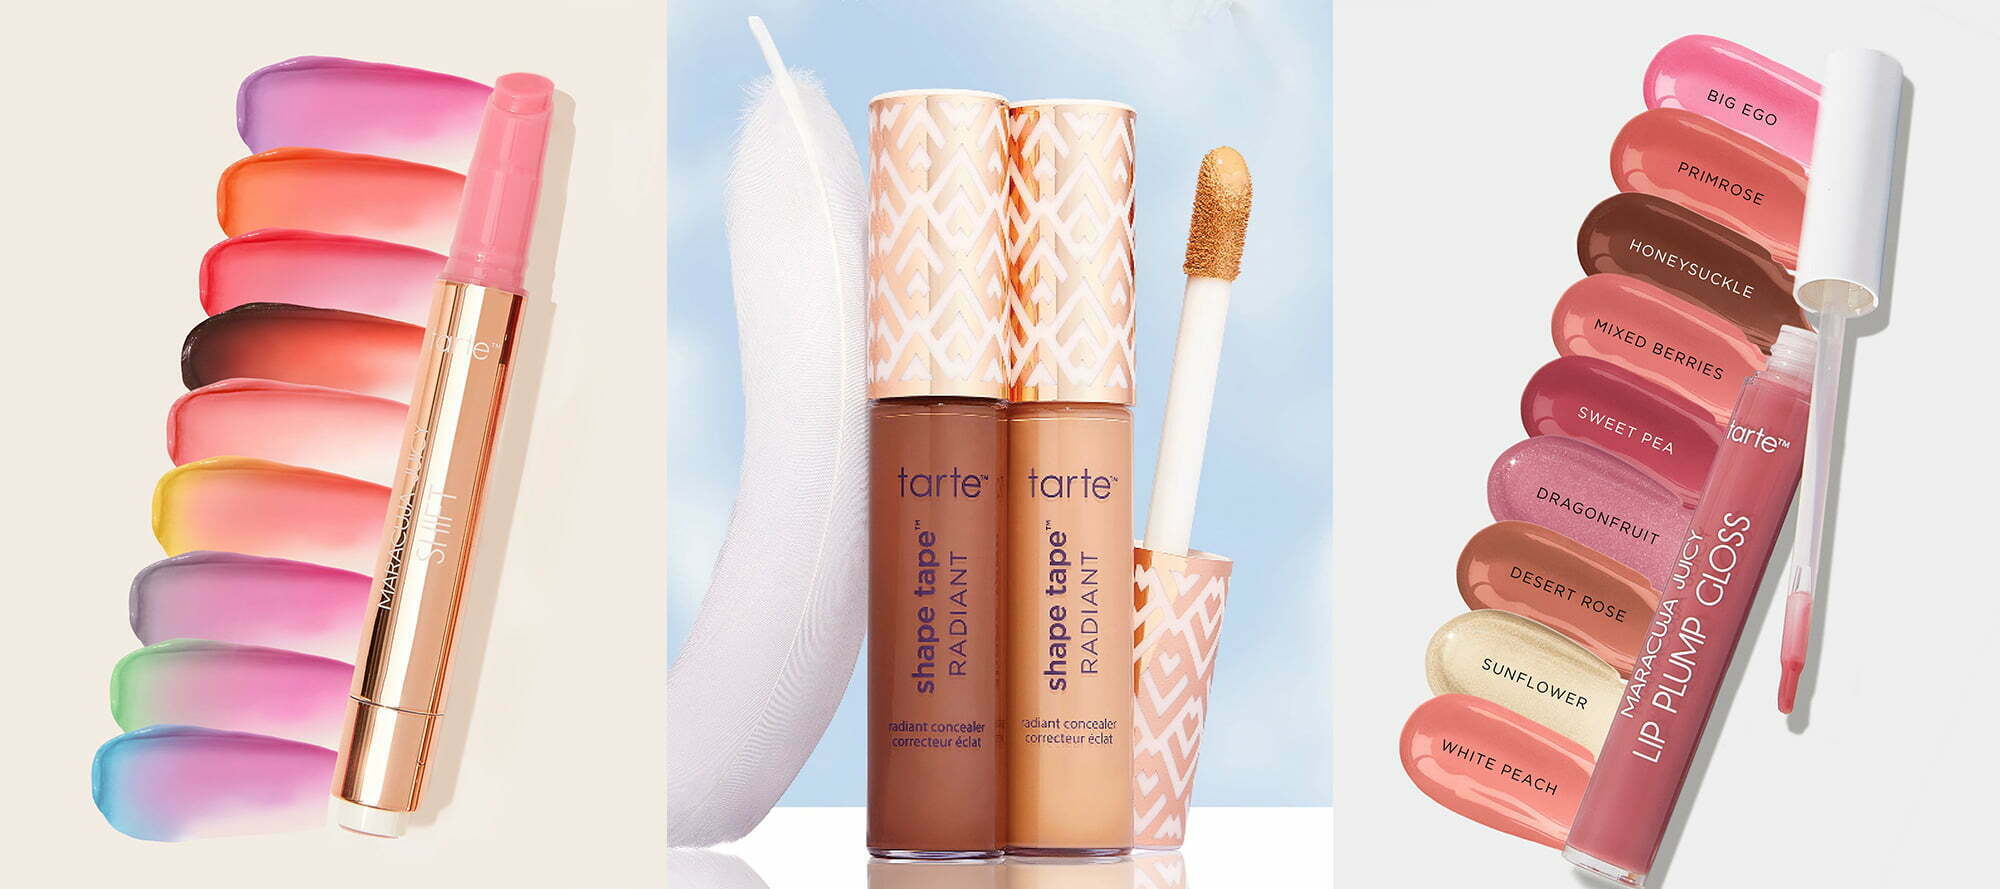 New launches from tarte